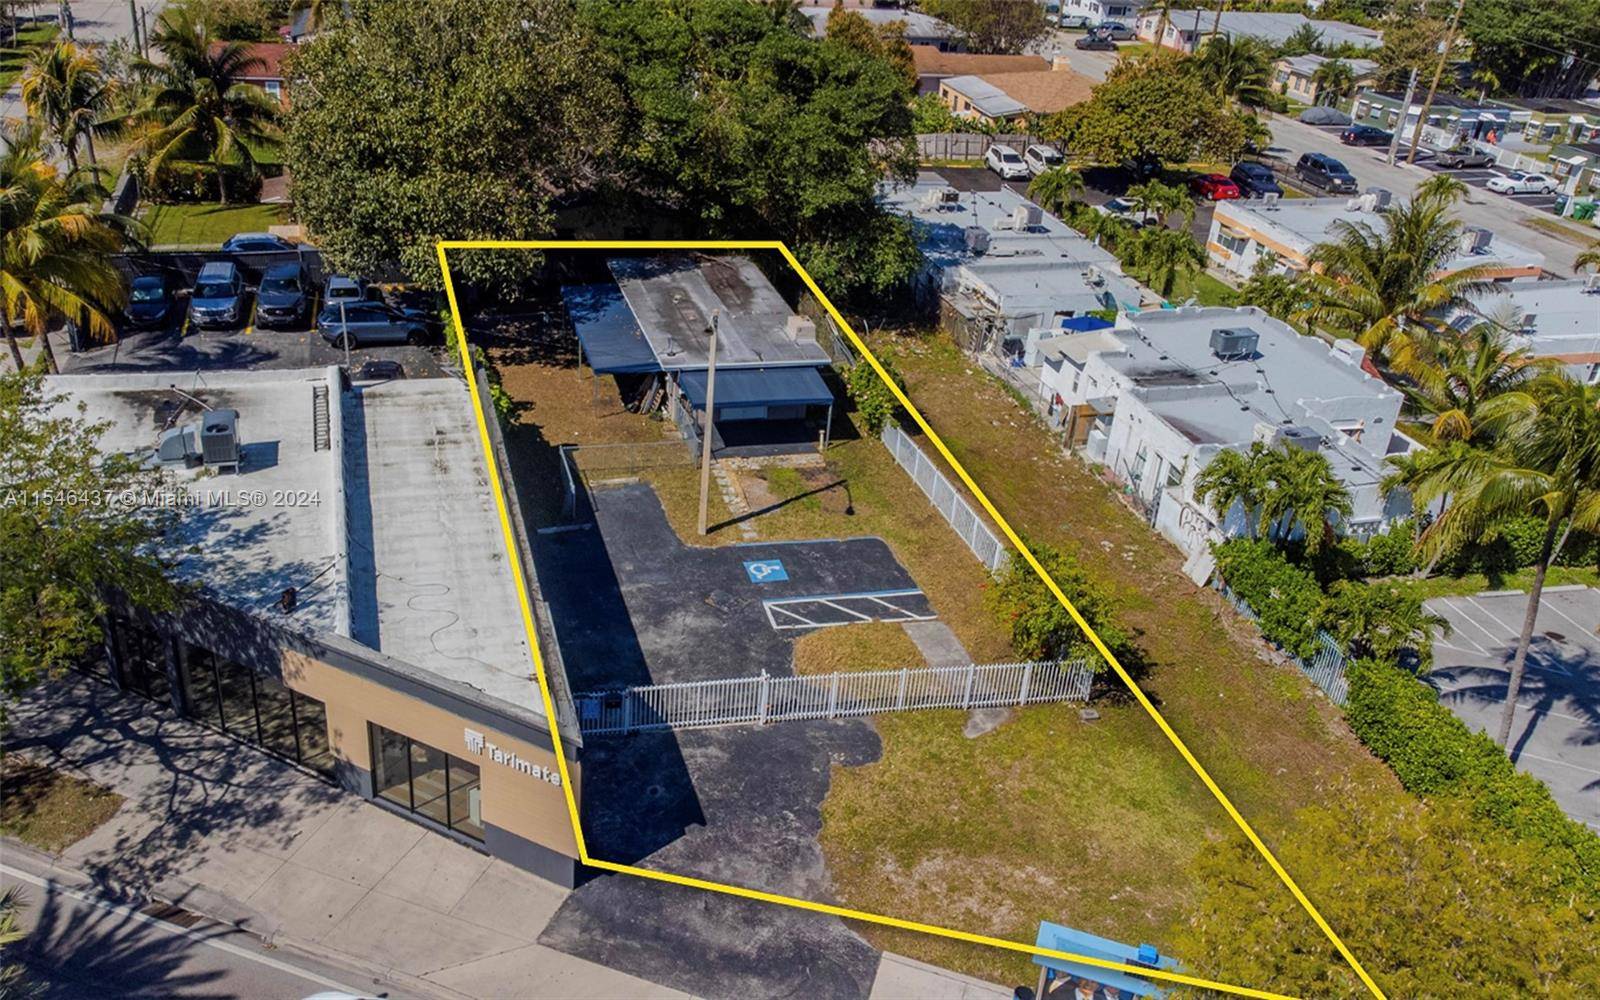 Opportunity to lease a building and lot in North Miami on Biscayne Boulevard, Miami s main corridor.